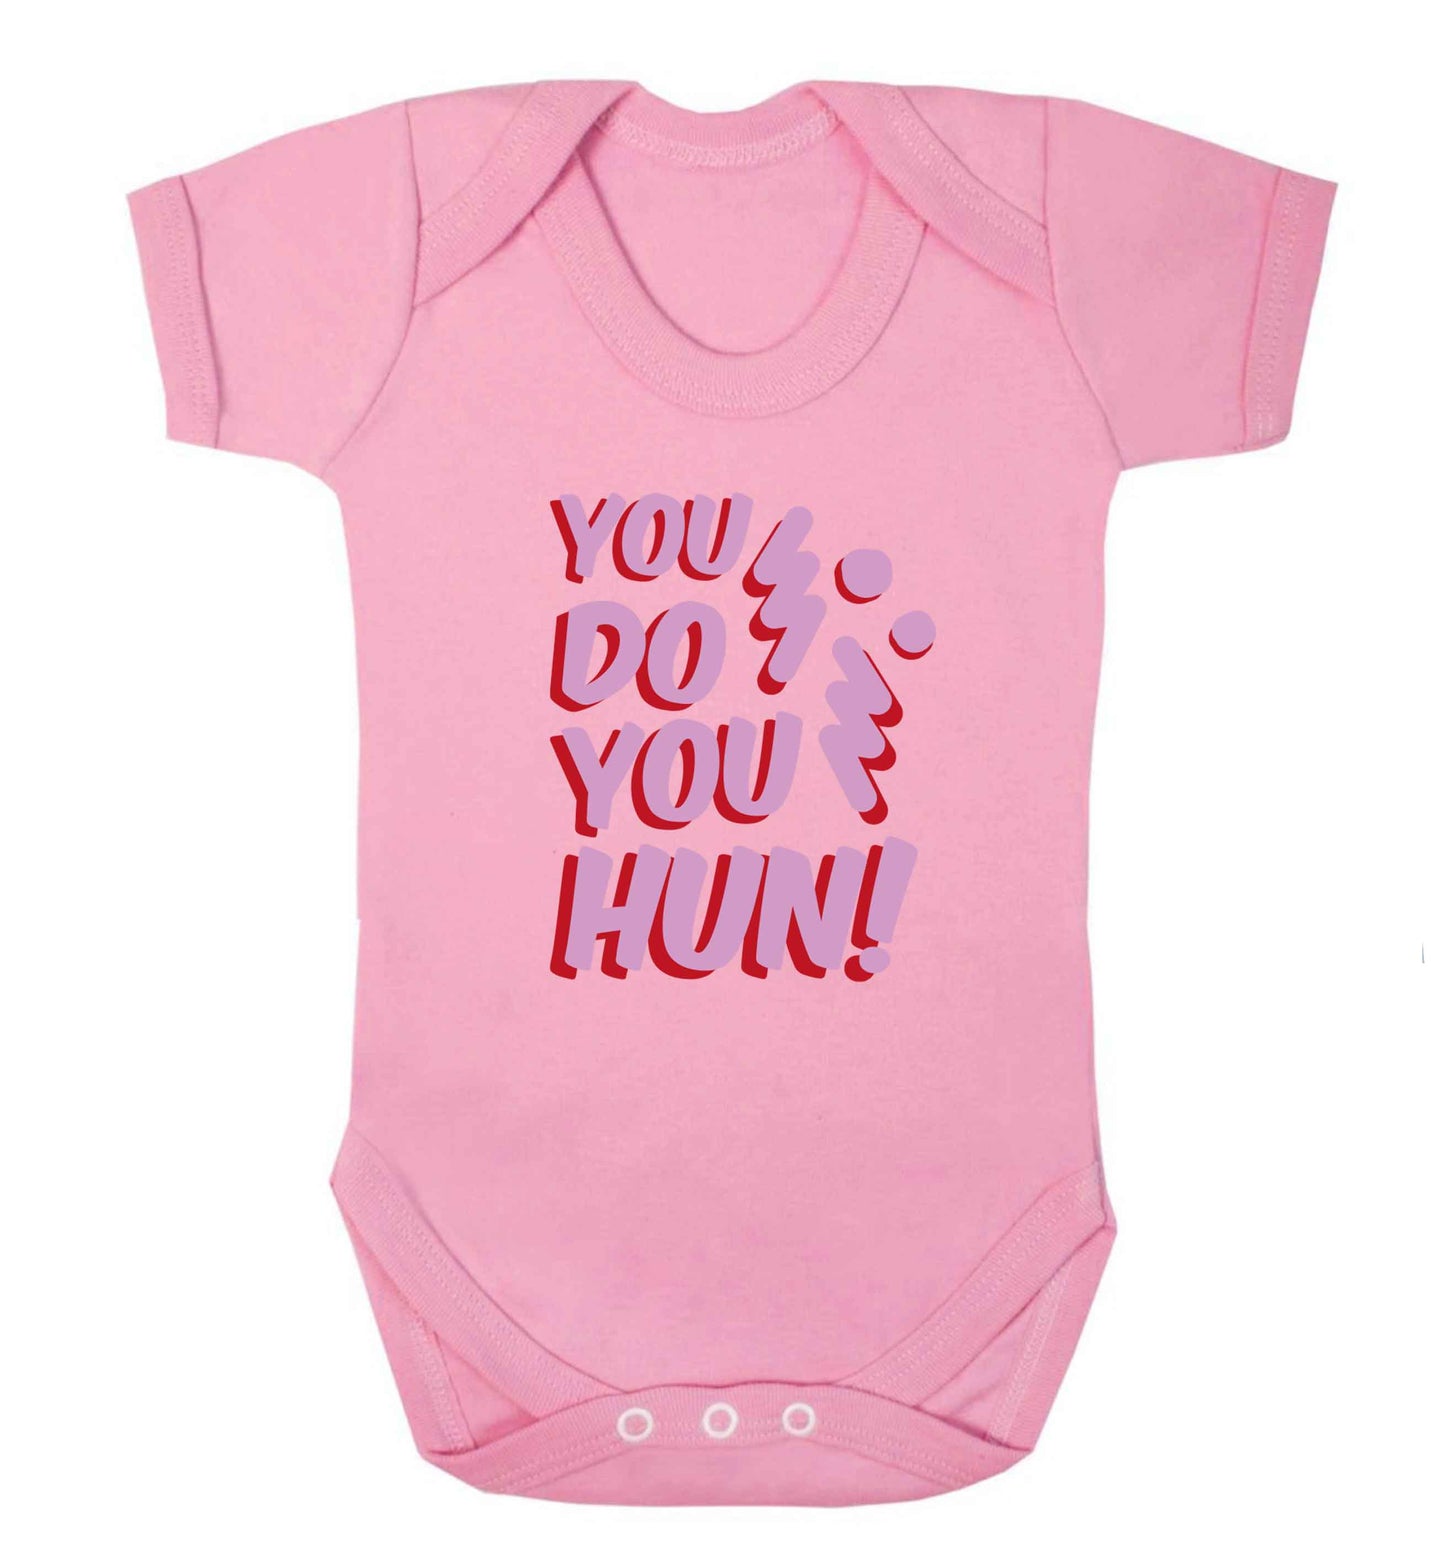 You do you hun baby vest pale pink 18-24 months